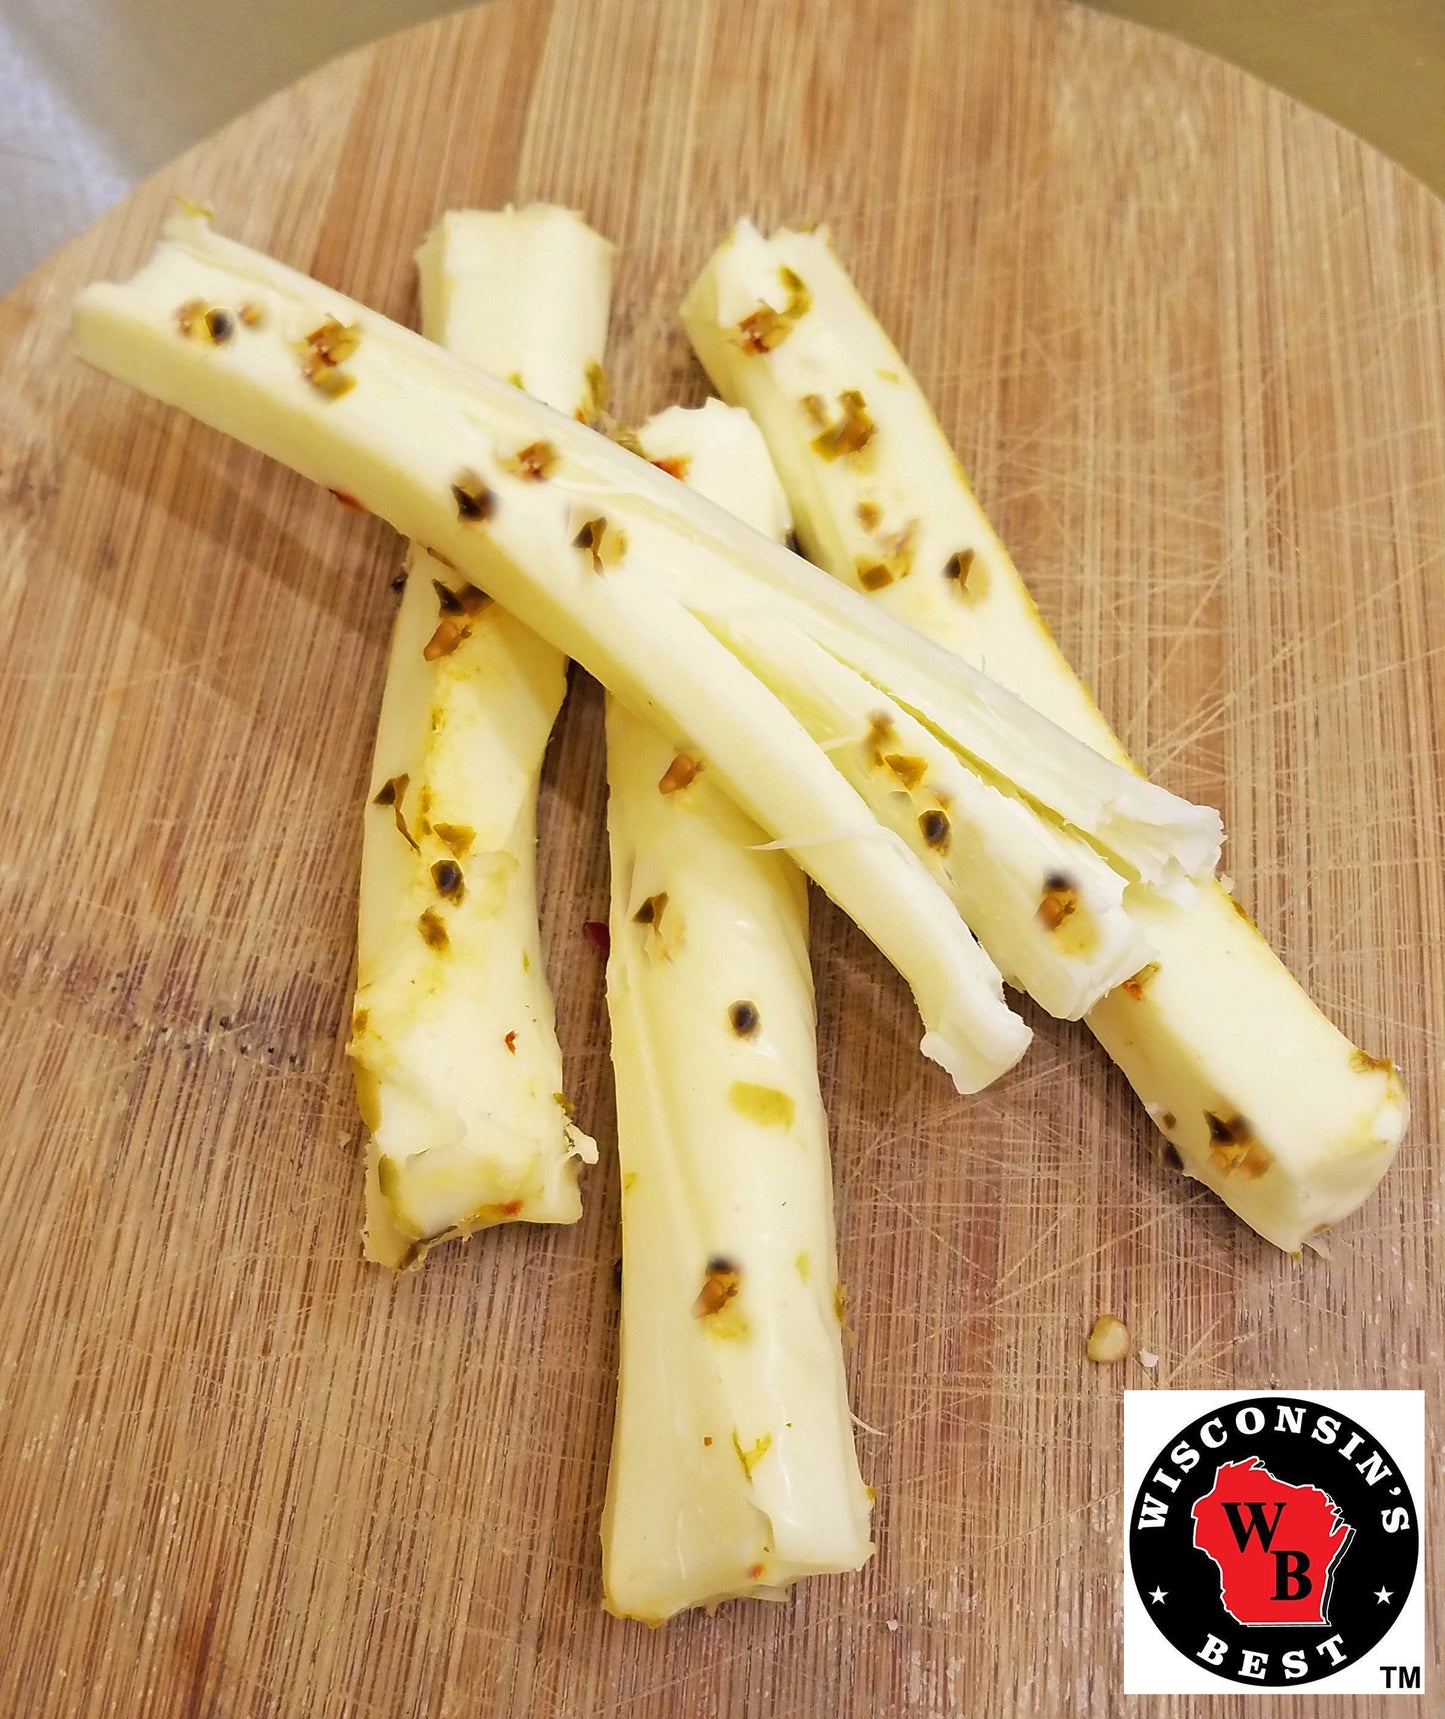 Wisconsin Cheese Company's String Cheese Sampler Gift Box. Holiday Cheese Assortment Gift, Original String, Pepper and Smoked String. A Great Gift for Birthdays or Mother's Day.